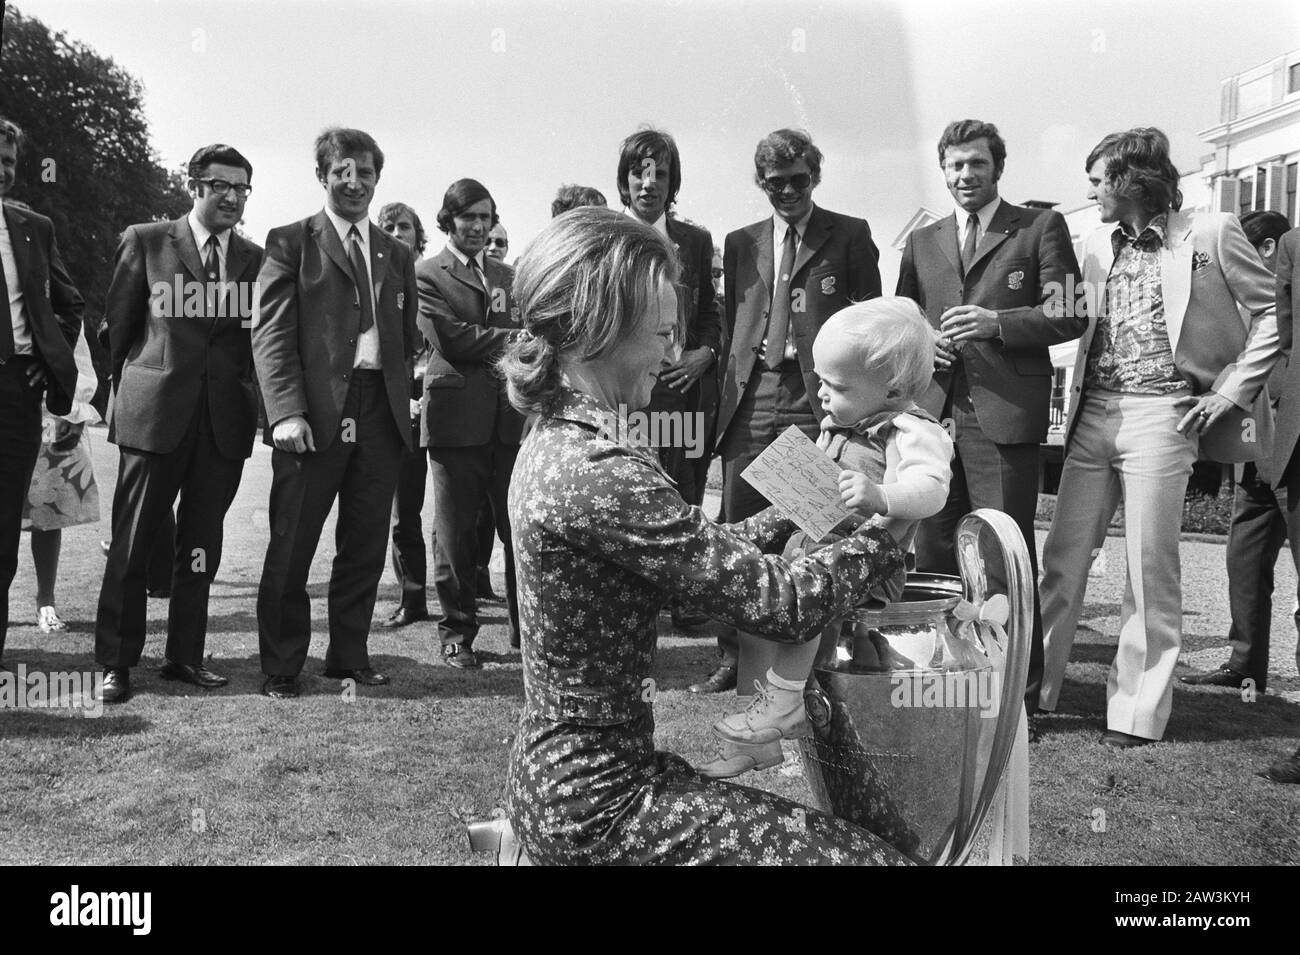 Reception of the football team Ajax by Queen Juliana at Soestdijk Palace  Princess Irene puts prince Carlos Jr. in the cup. Date: June 3, 1971 Location: Soestdijk, Utrecht (province) Keywords : princes, princesses, sports, football, soccer Person Name: Carlos Jr., prince, Irene (princess Netherlands) Stock Photo